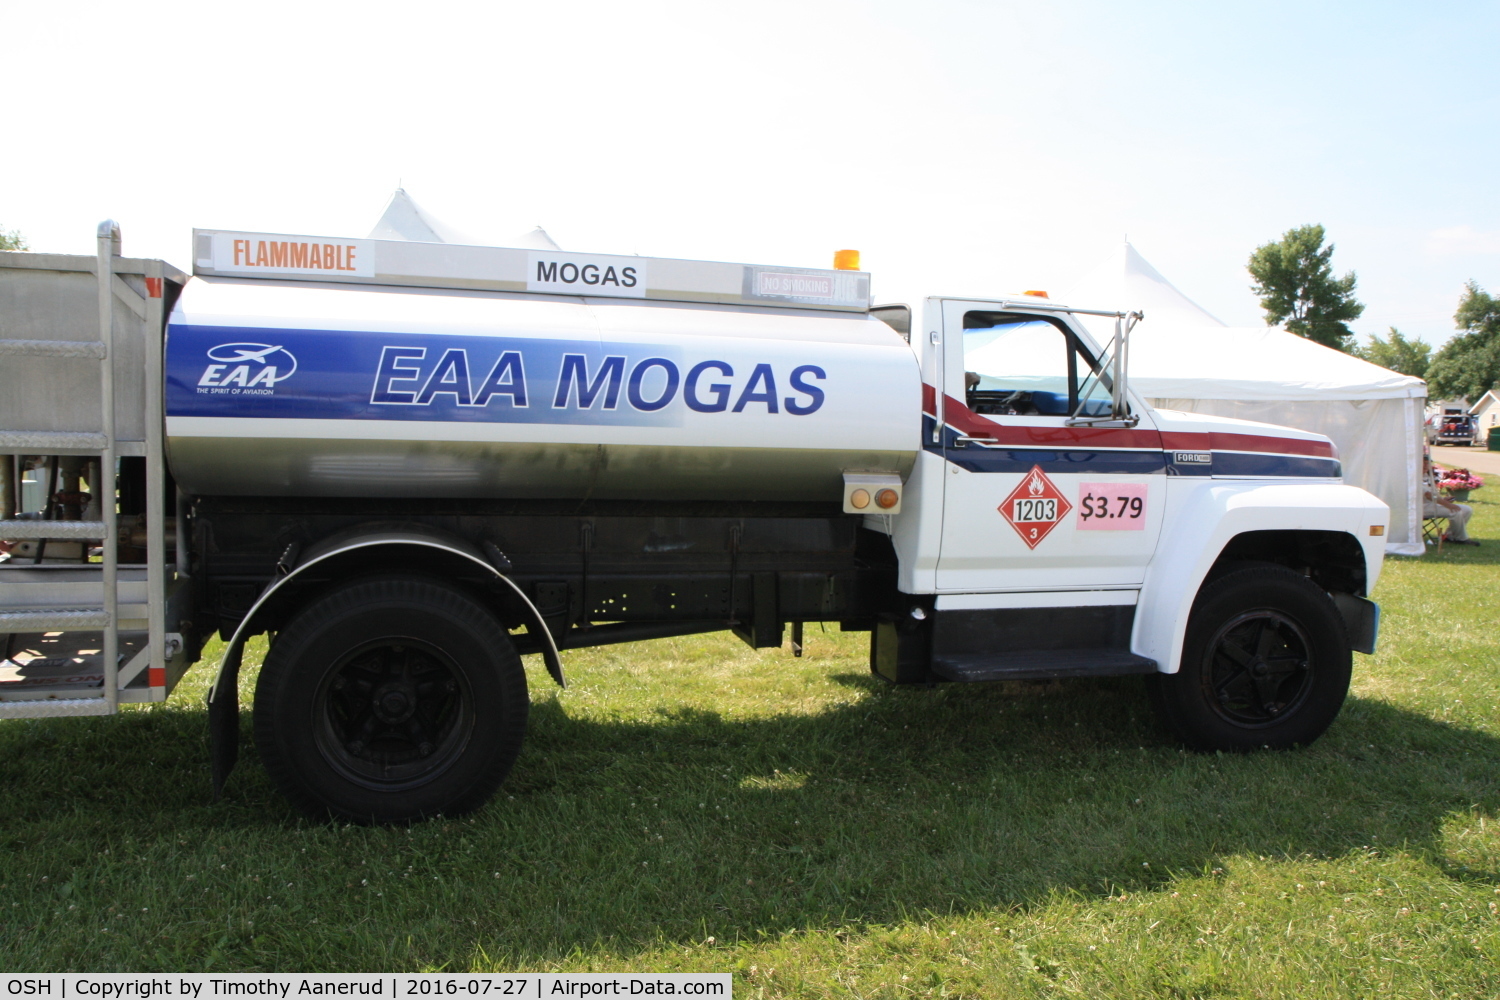 Wittman Regional Airport (OSH) - Auto Fuel was available for the first time at AirVenture.  EAA made it happen by buying the truck and leasing it to Basler.